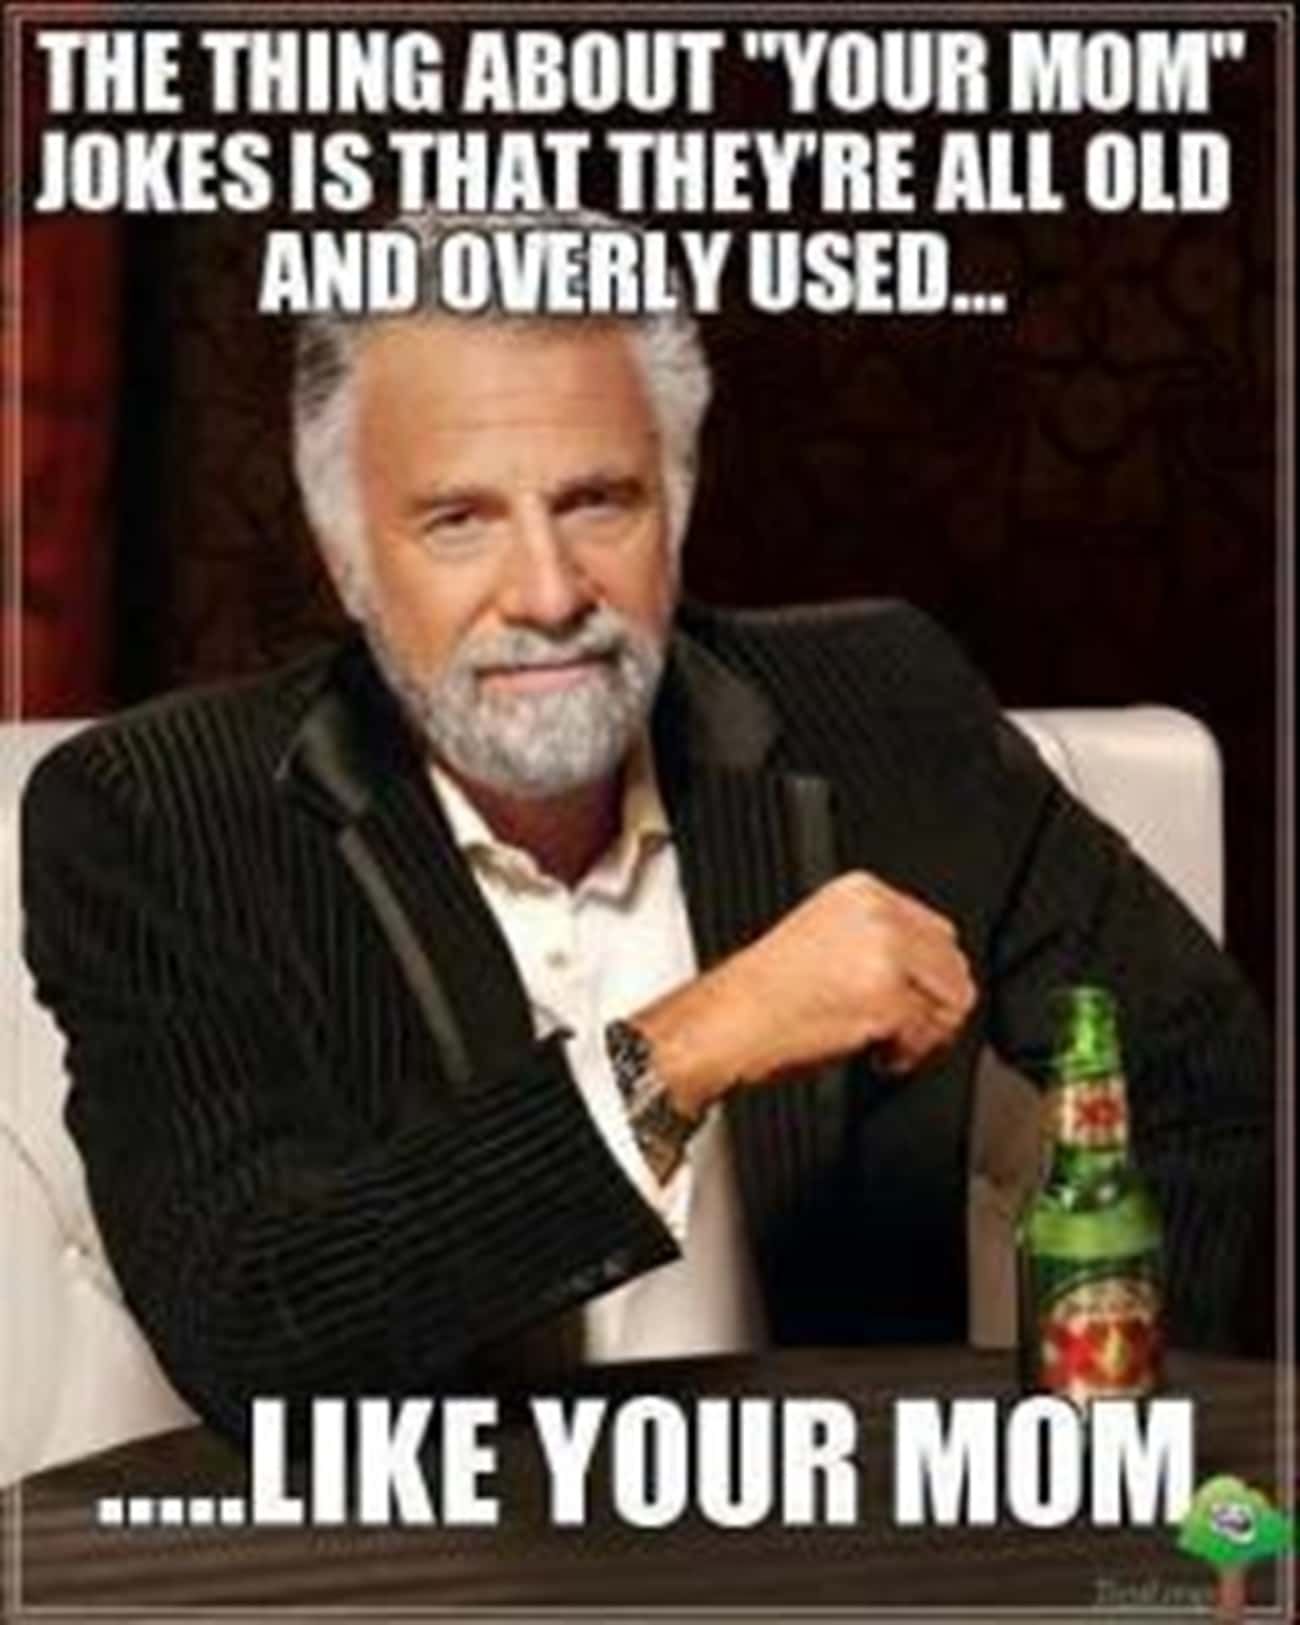 THE THING ABOUT "YOUR MOM"
JOKES IS THAT THEY'RE ALL OLD
AND OVERLY USED...
....LIKE YOUR MOM